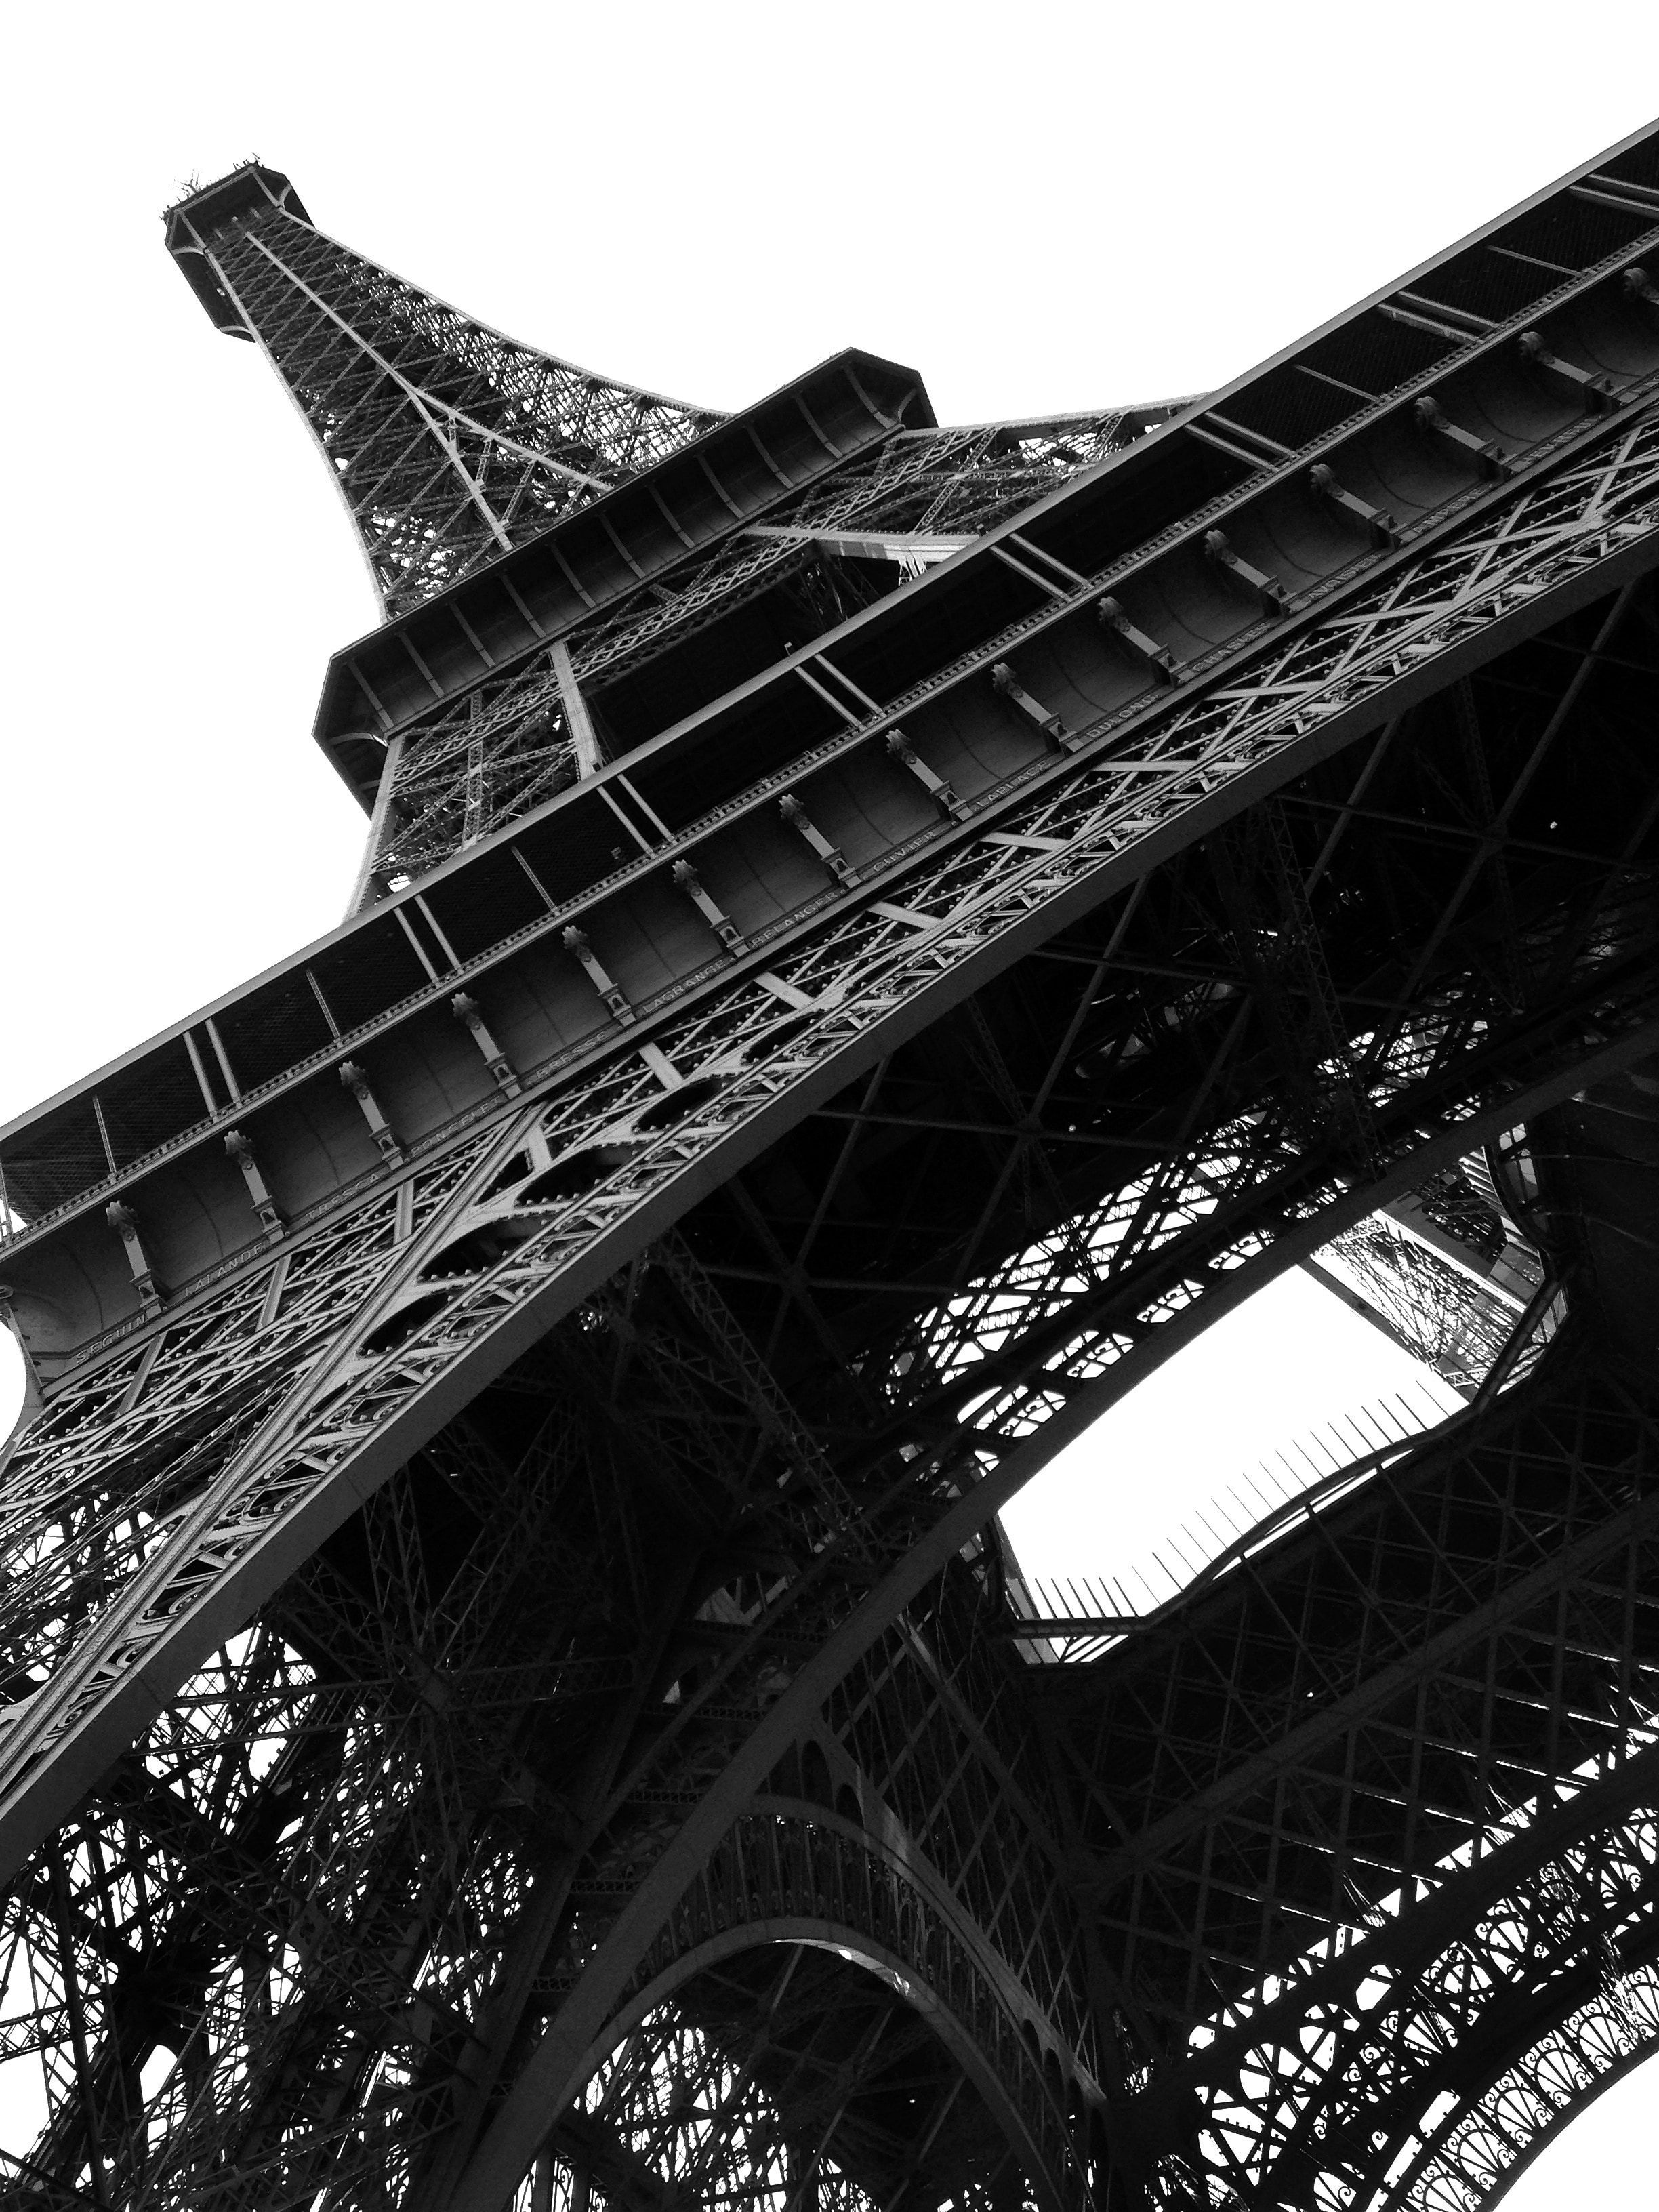 The Eiffel Tower, Paris, France, low angle view, architecture